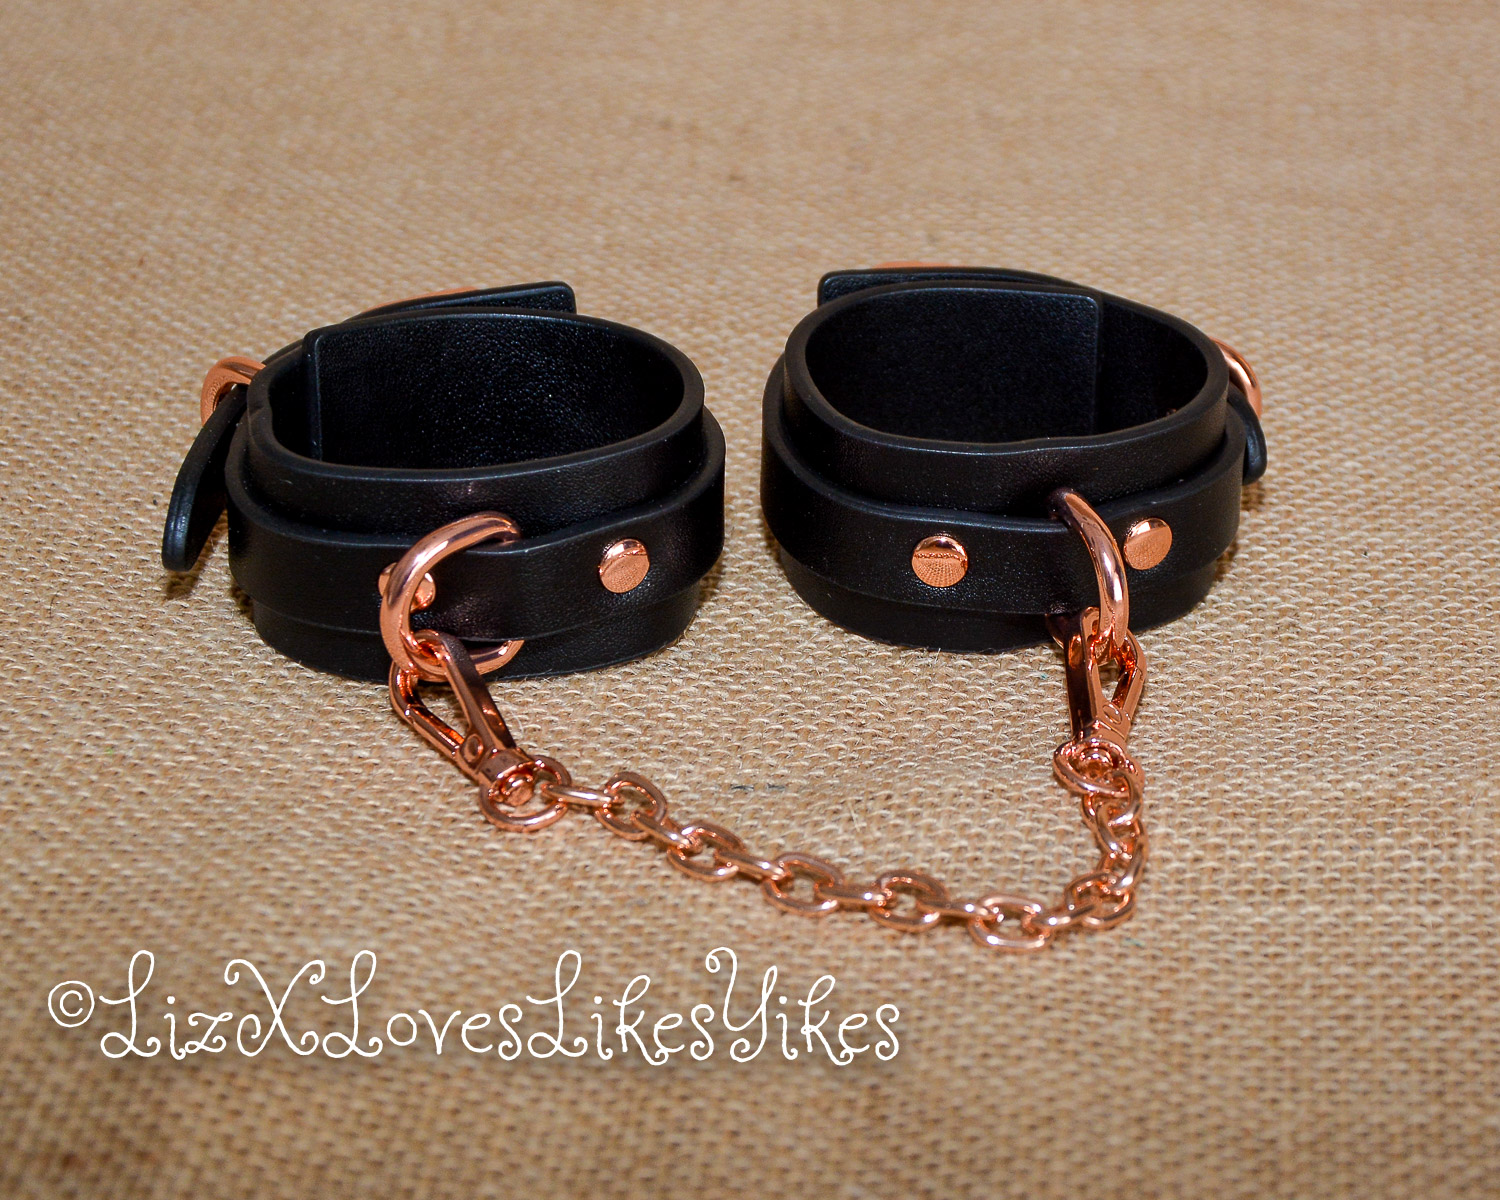 Review of Bondage Couture Vegan Leather Wrist Cuffs pic picture